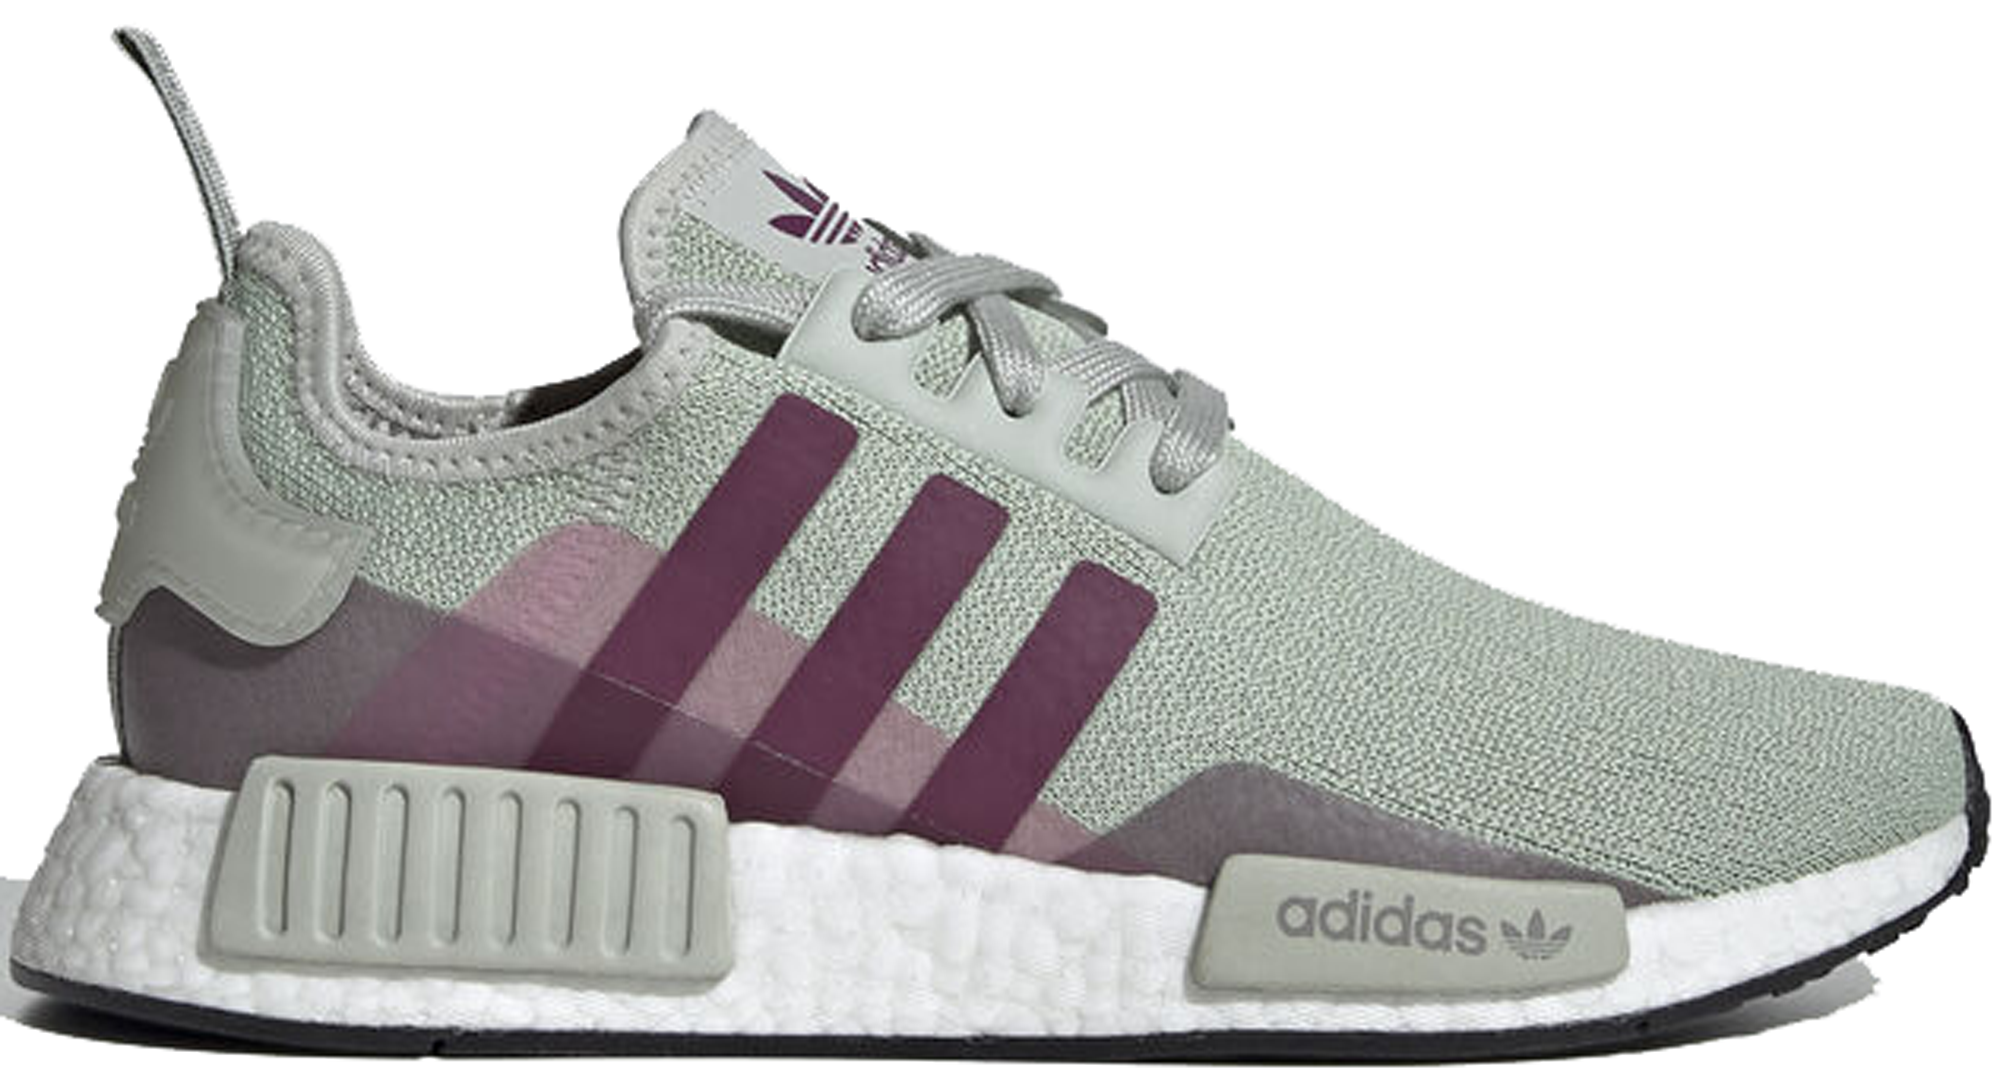 adidas NMD R1 Outdoor Pack Ash Silver 